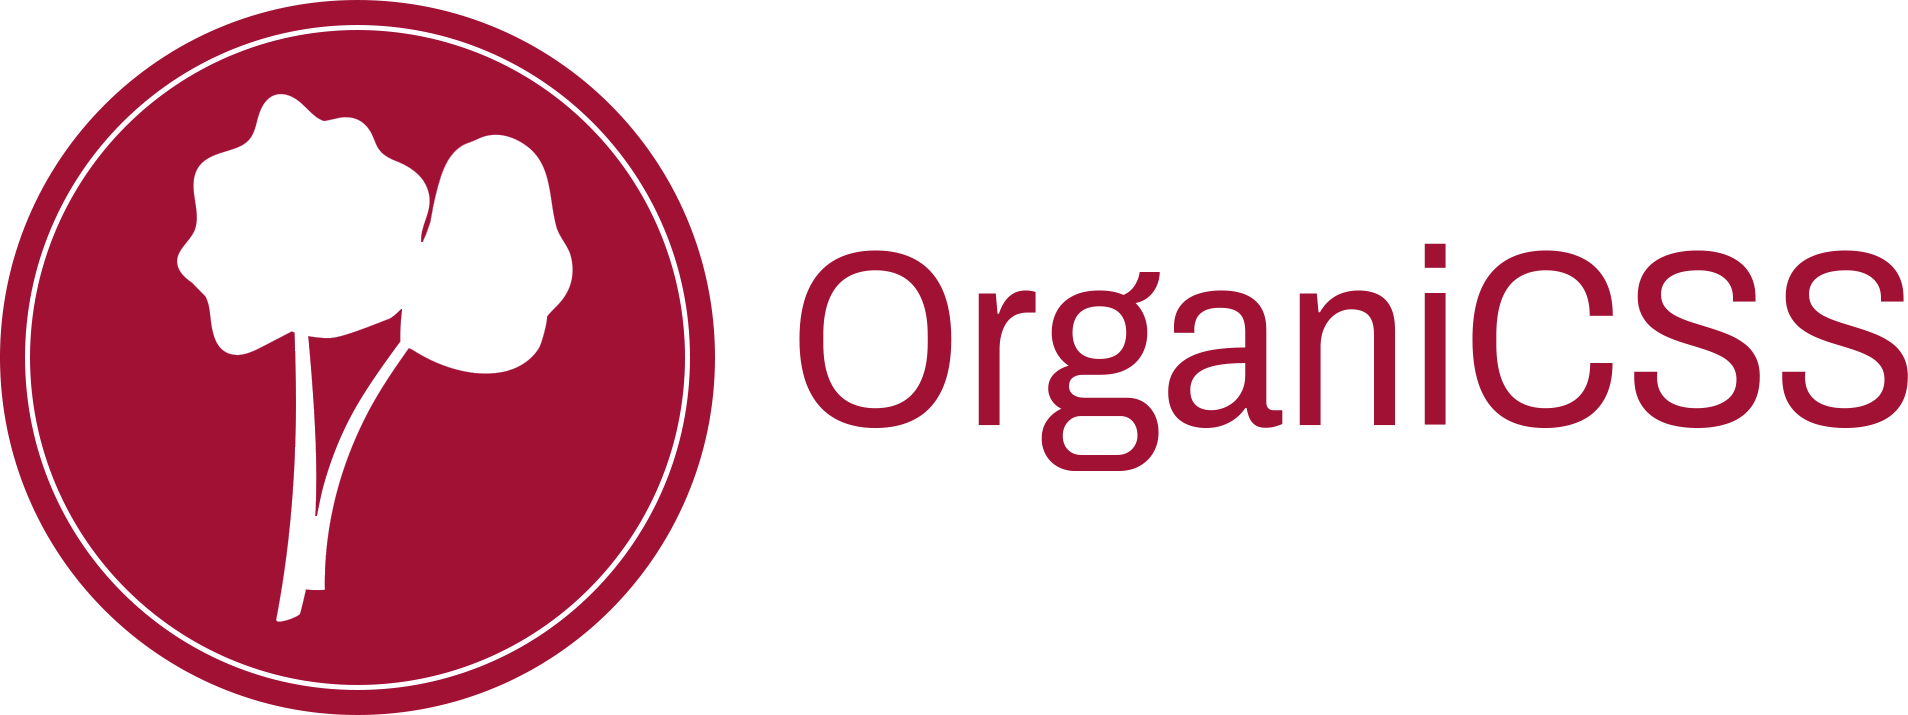 OrganiCSS standard logo with icon and name